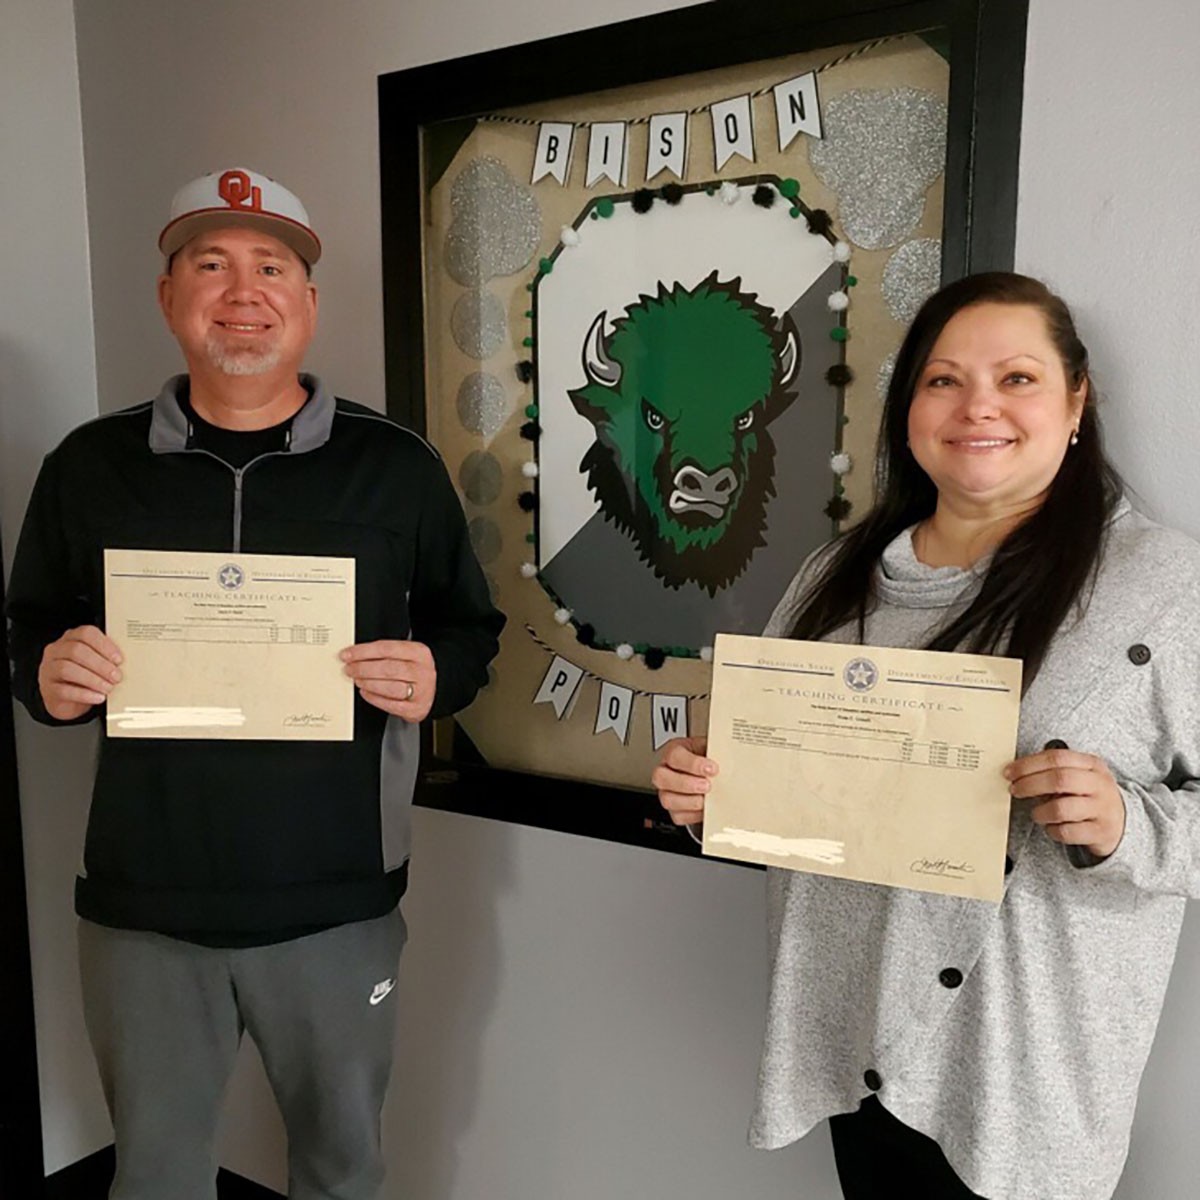 Man & woman hold certificates